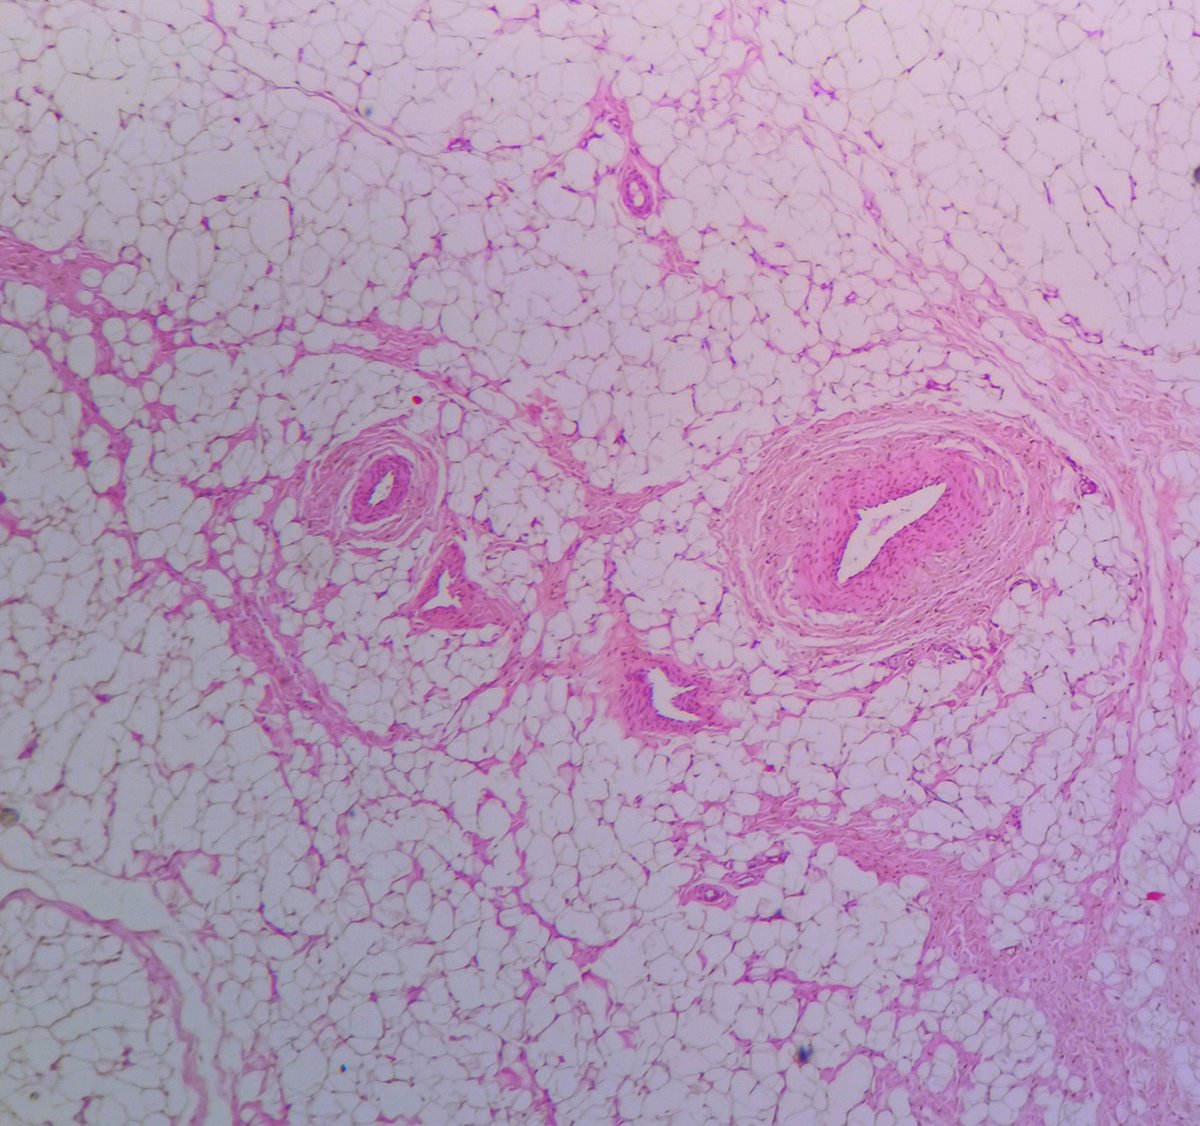 3/5 I reported this as intramuscular hemangioma b4 the orthopedic surgeon showed me the clinical picture and asked me to review the histology.... Then i looked back at the histology and said to myself what kind of vessels are these! They are not compatible with ordinary lipoma